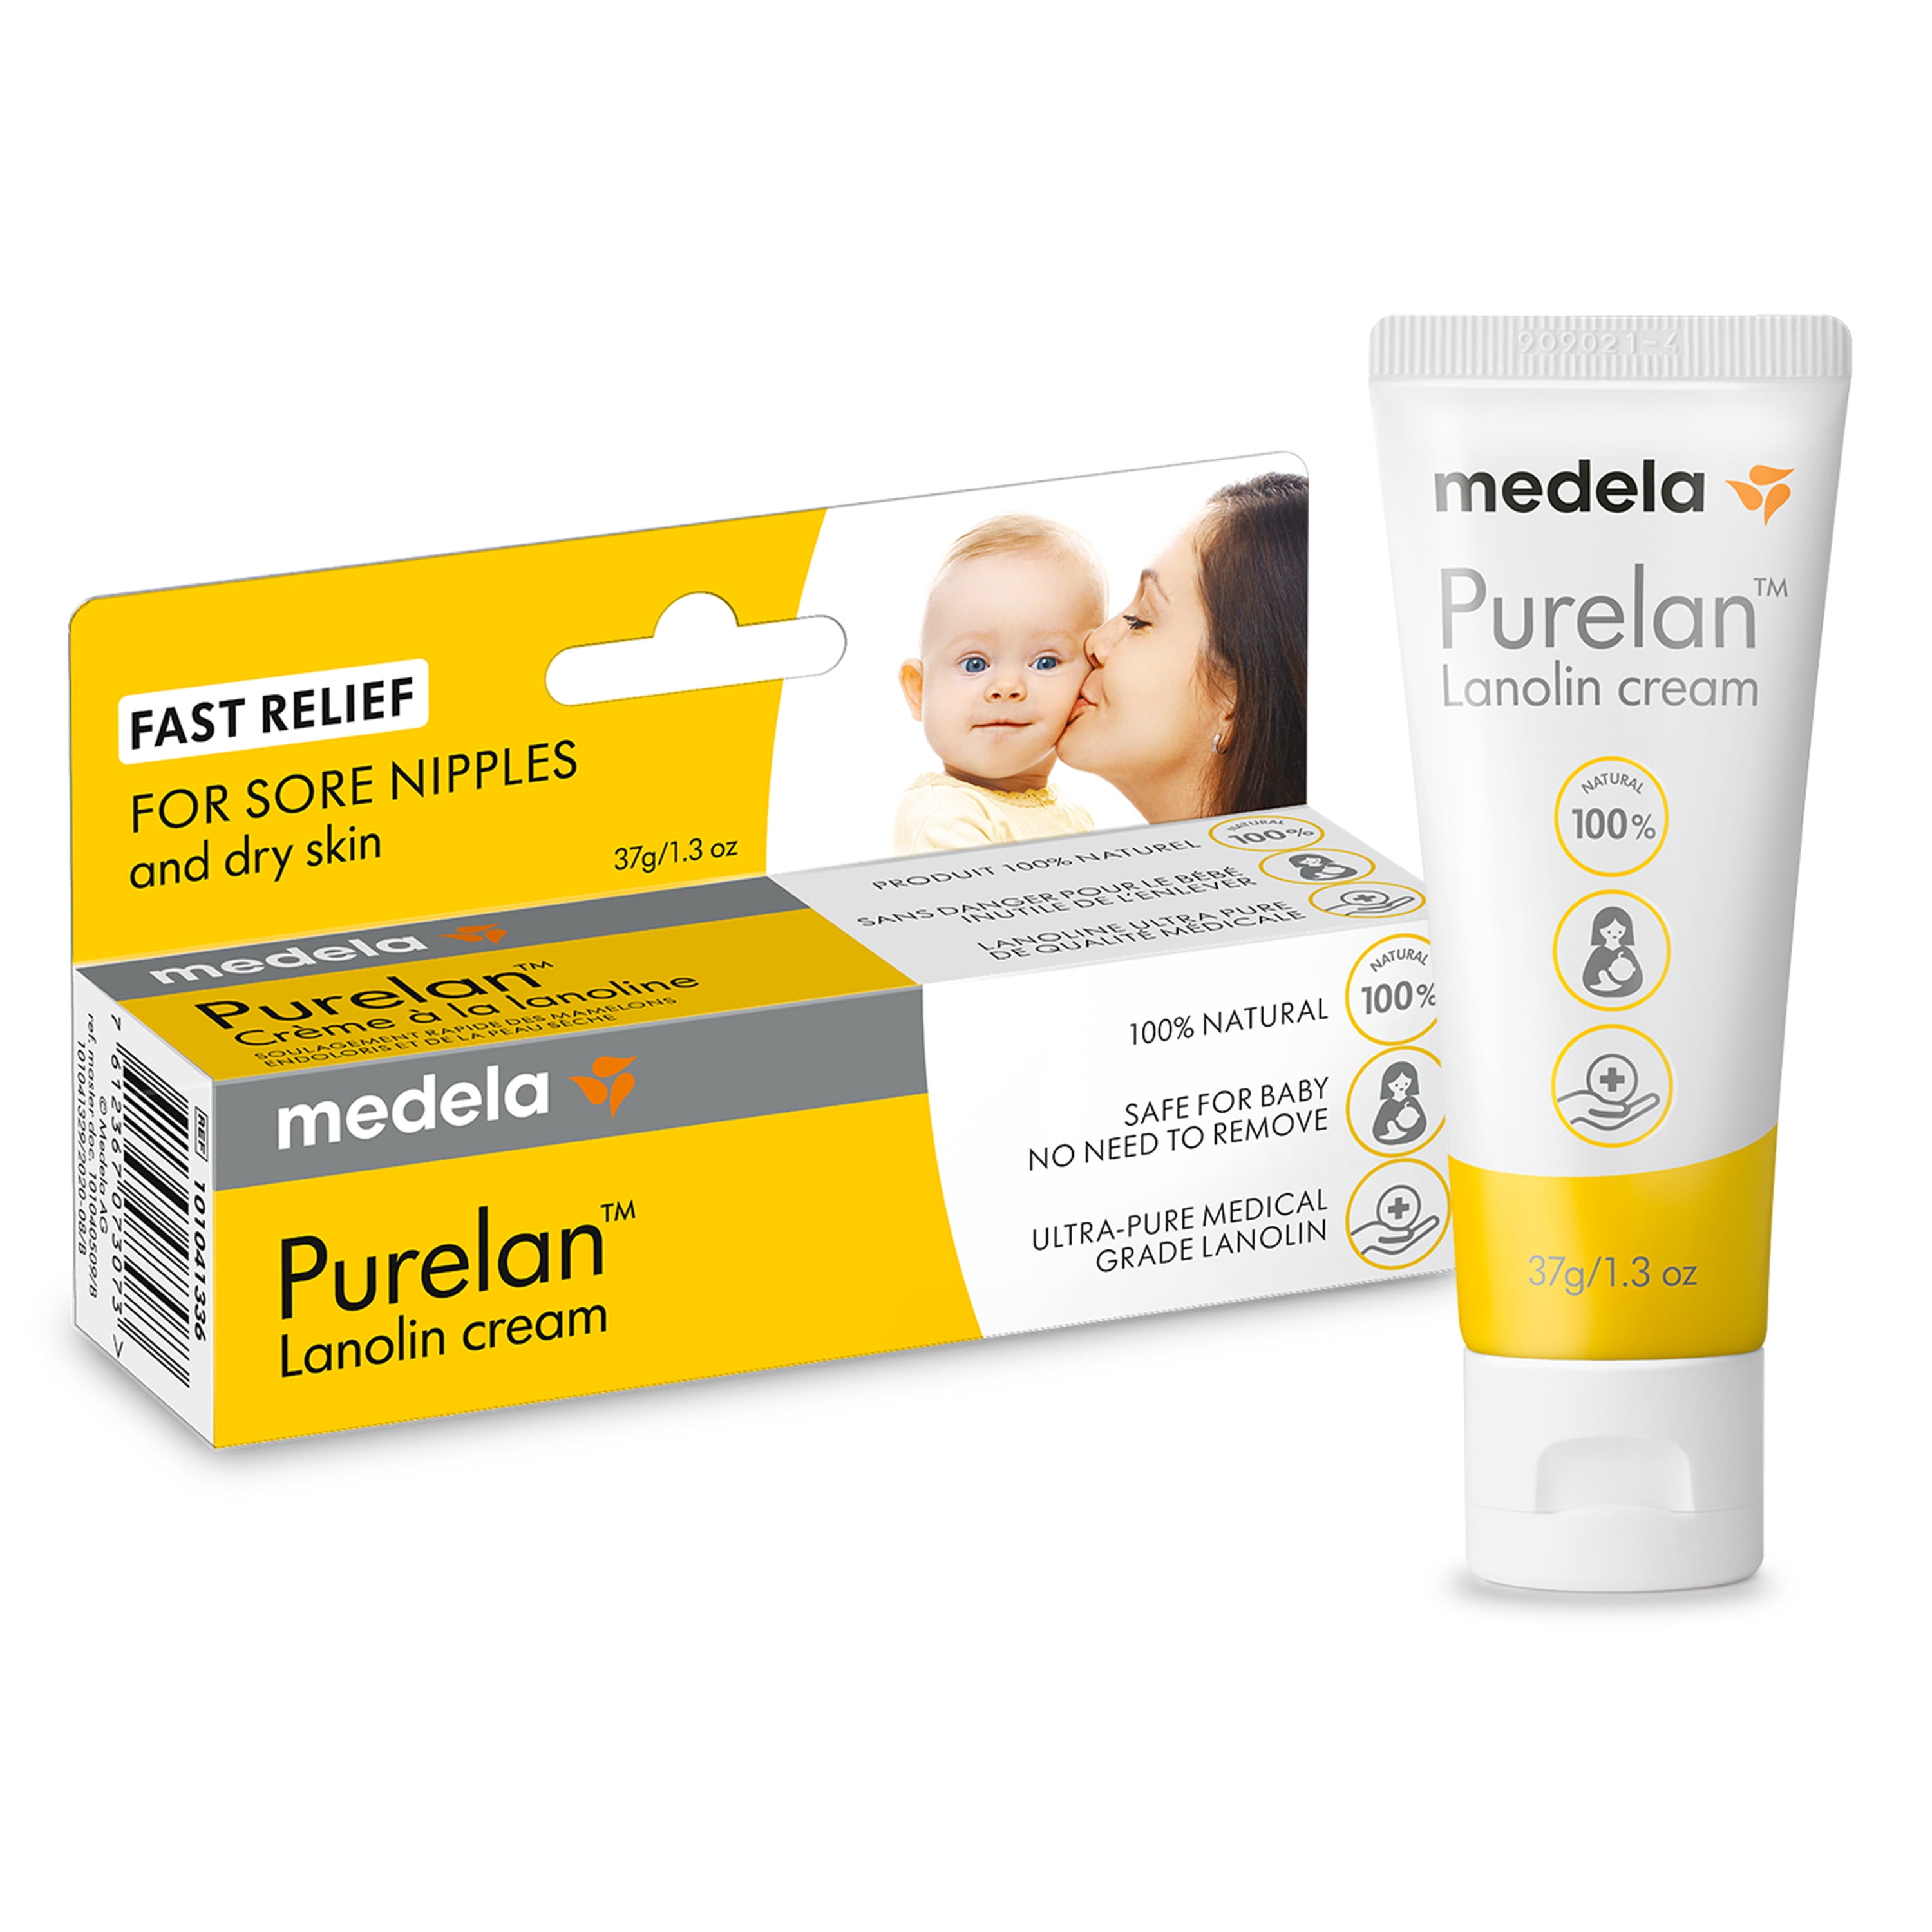 Medela Purelan Lanolin for Breastfeeding, 100% All Natural Single Ingredient, Soothing, Safe for Nursing Mom and Baby, 1.3 Ounce Tube